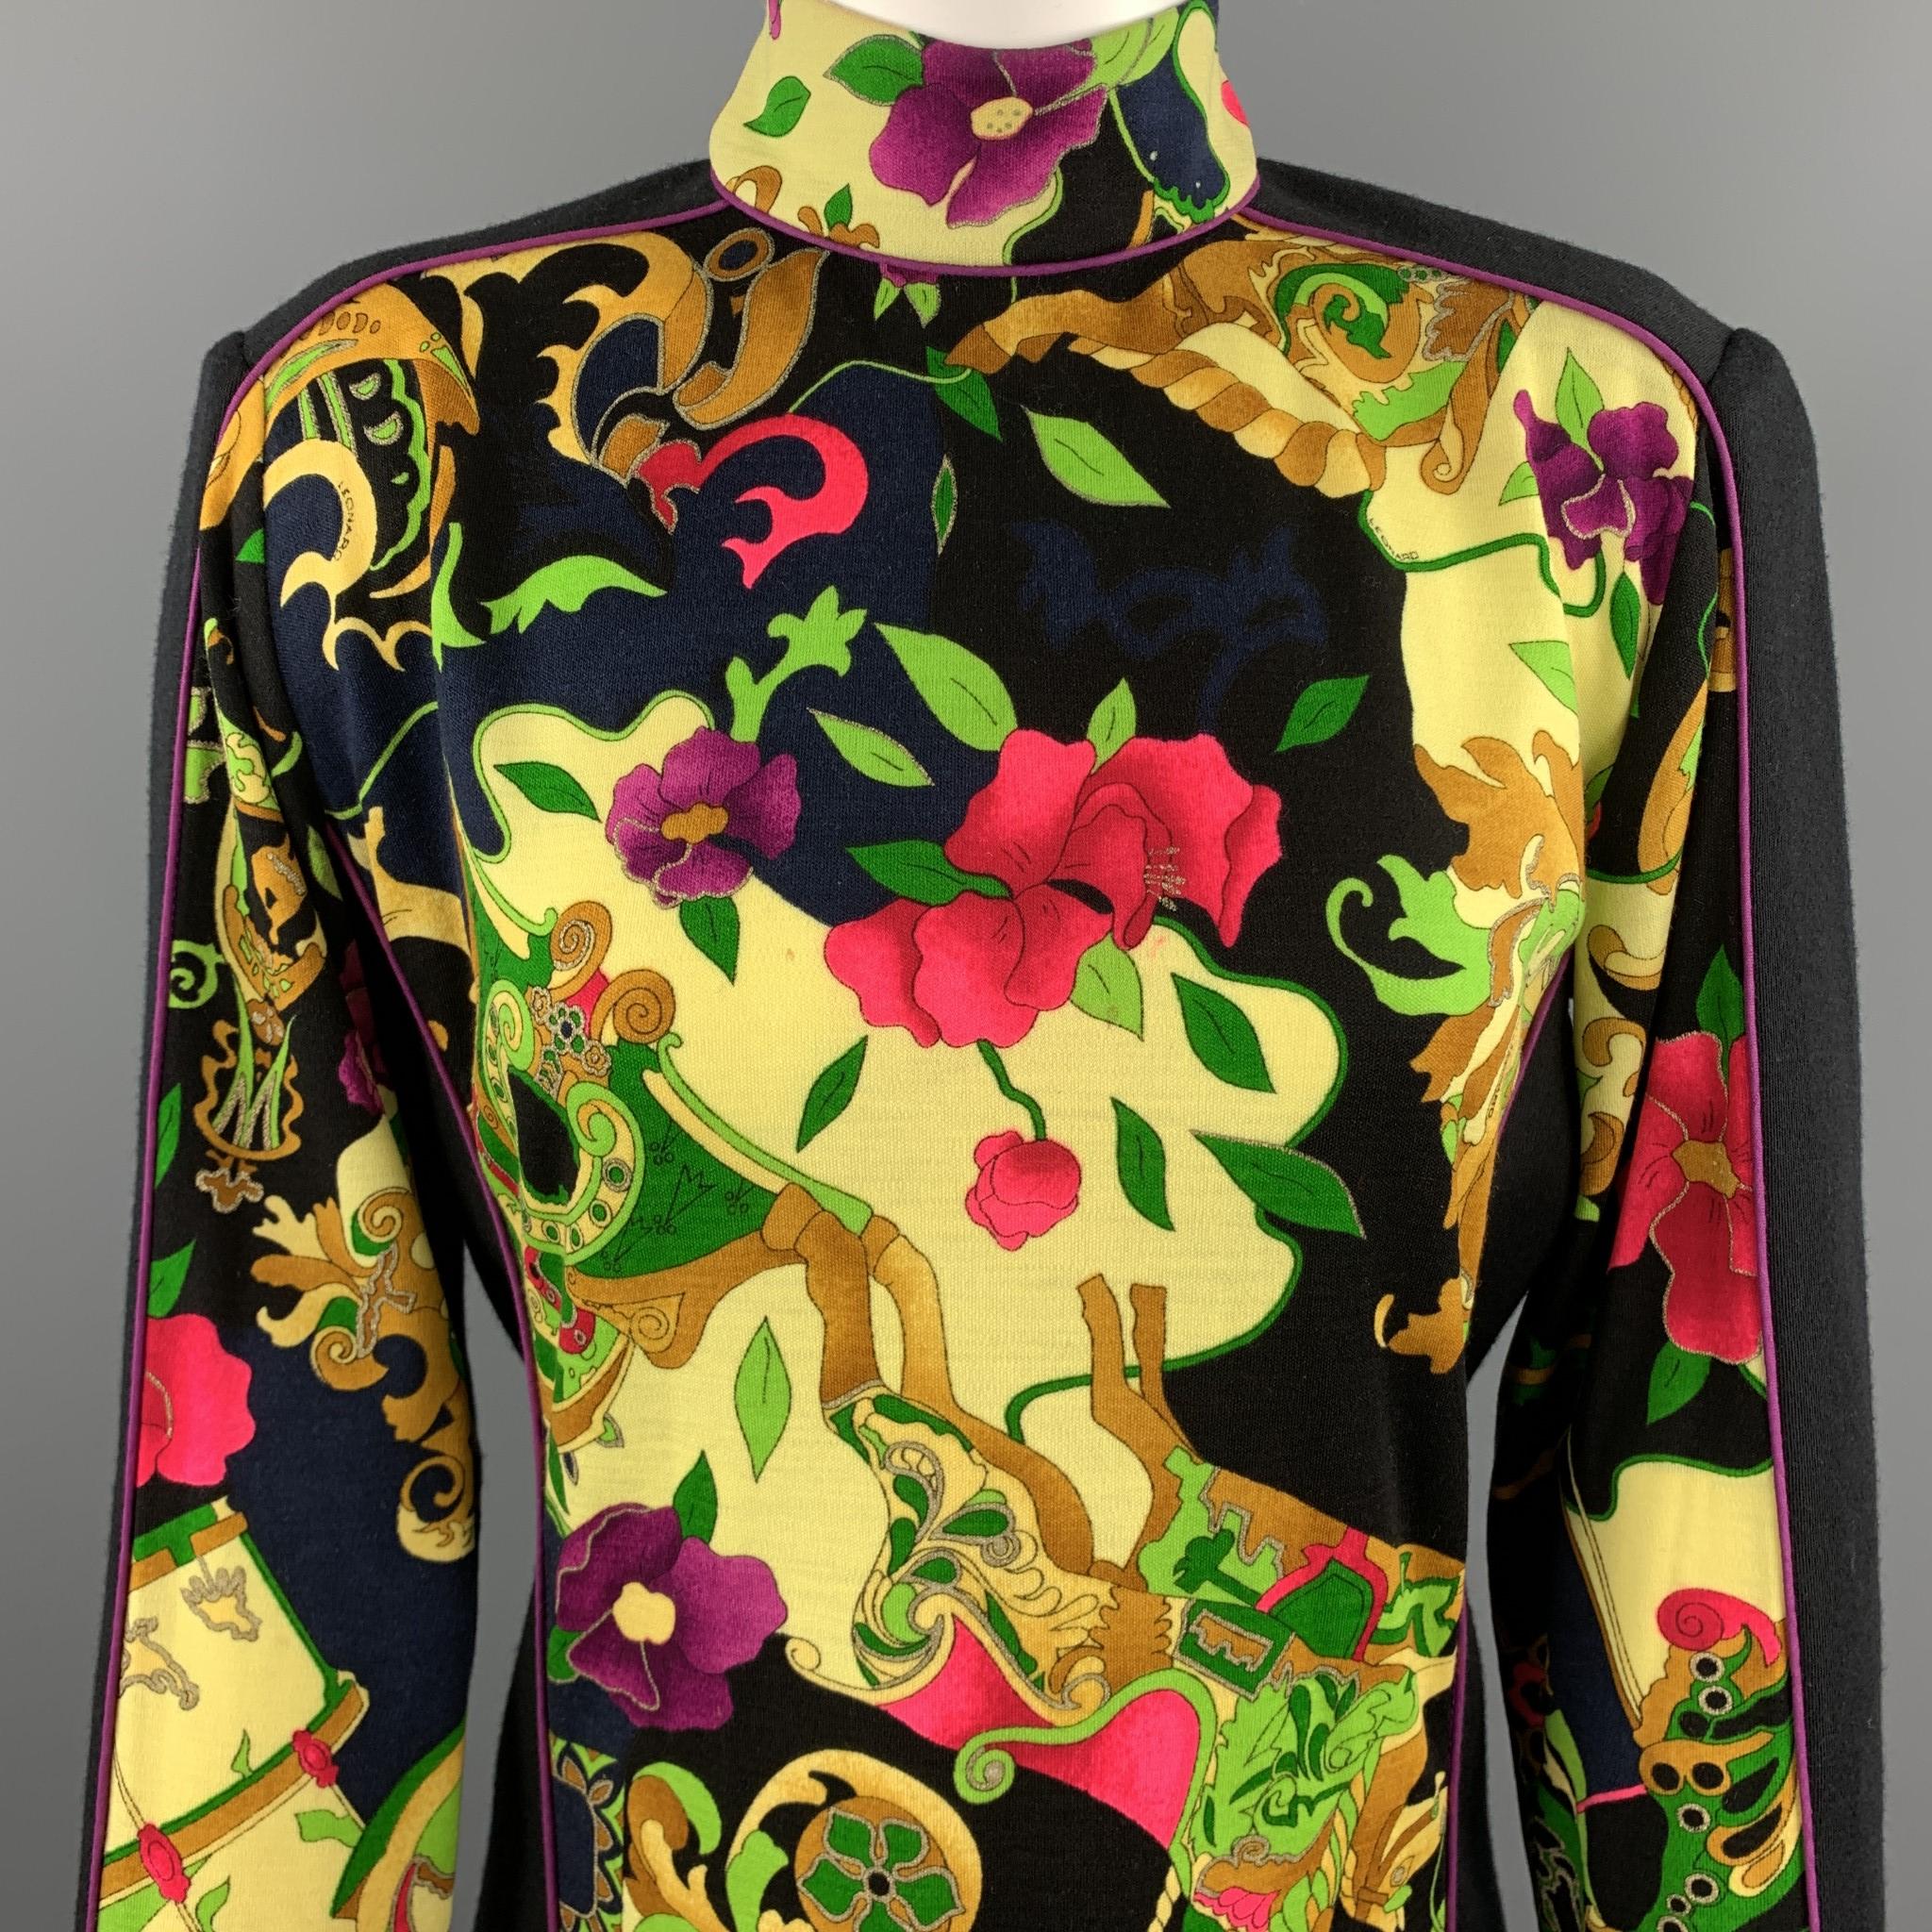 Vintage LEONARD PARIS dress comes in black wool stretch jersey knit with a mock neck, long sleeves, and yellow floral print panel. Made in Italy.

Very Good Pre-Owned Condition.
Marked: 2

Measurements:

Shoulder: 16 in.
Bust: 40 in.
Waist: 36